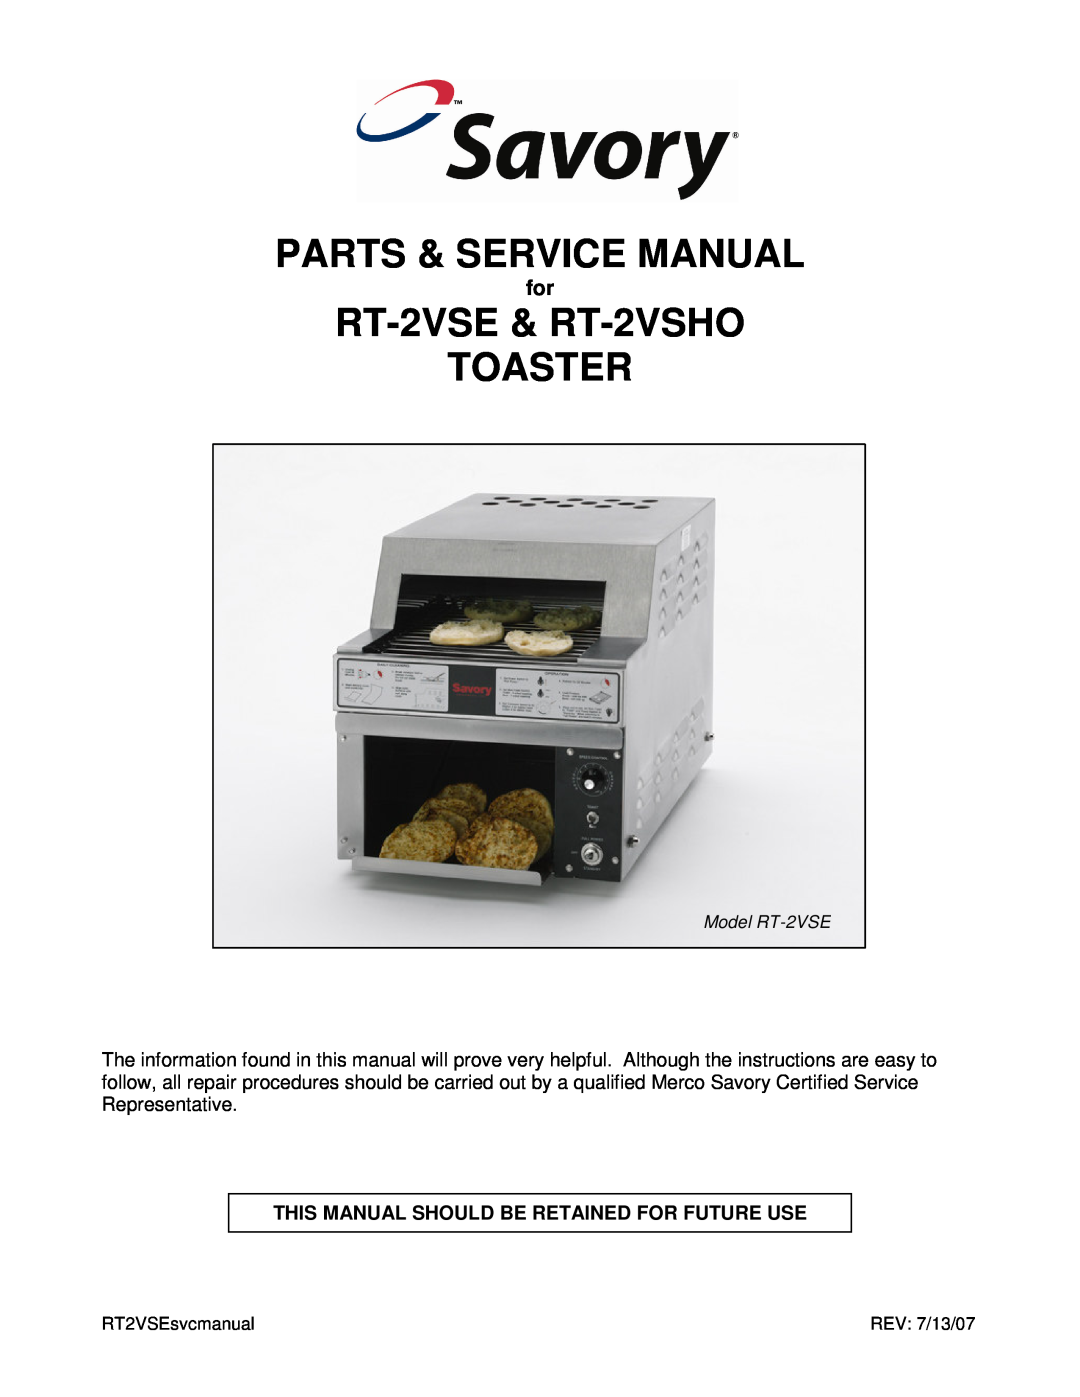 Merco Savory RT-2VSHO service manual This Manual Should Be Retained For Future Use, Parts & Service Manual, Model RT-2VSE 